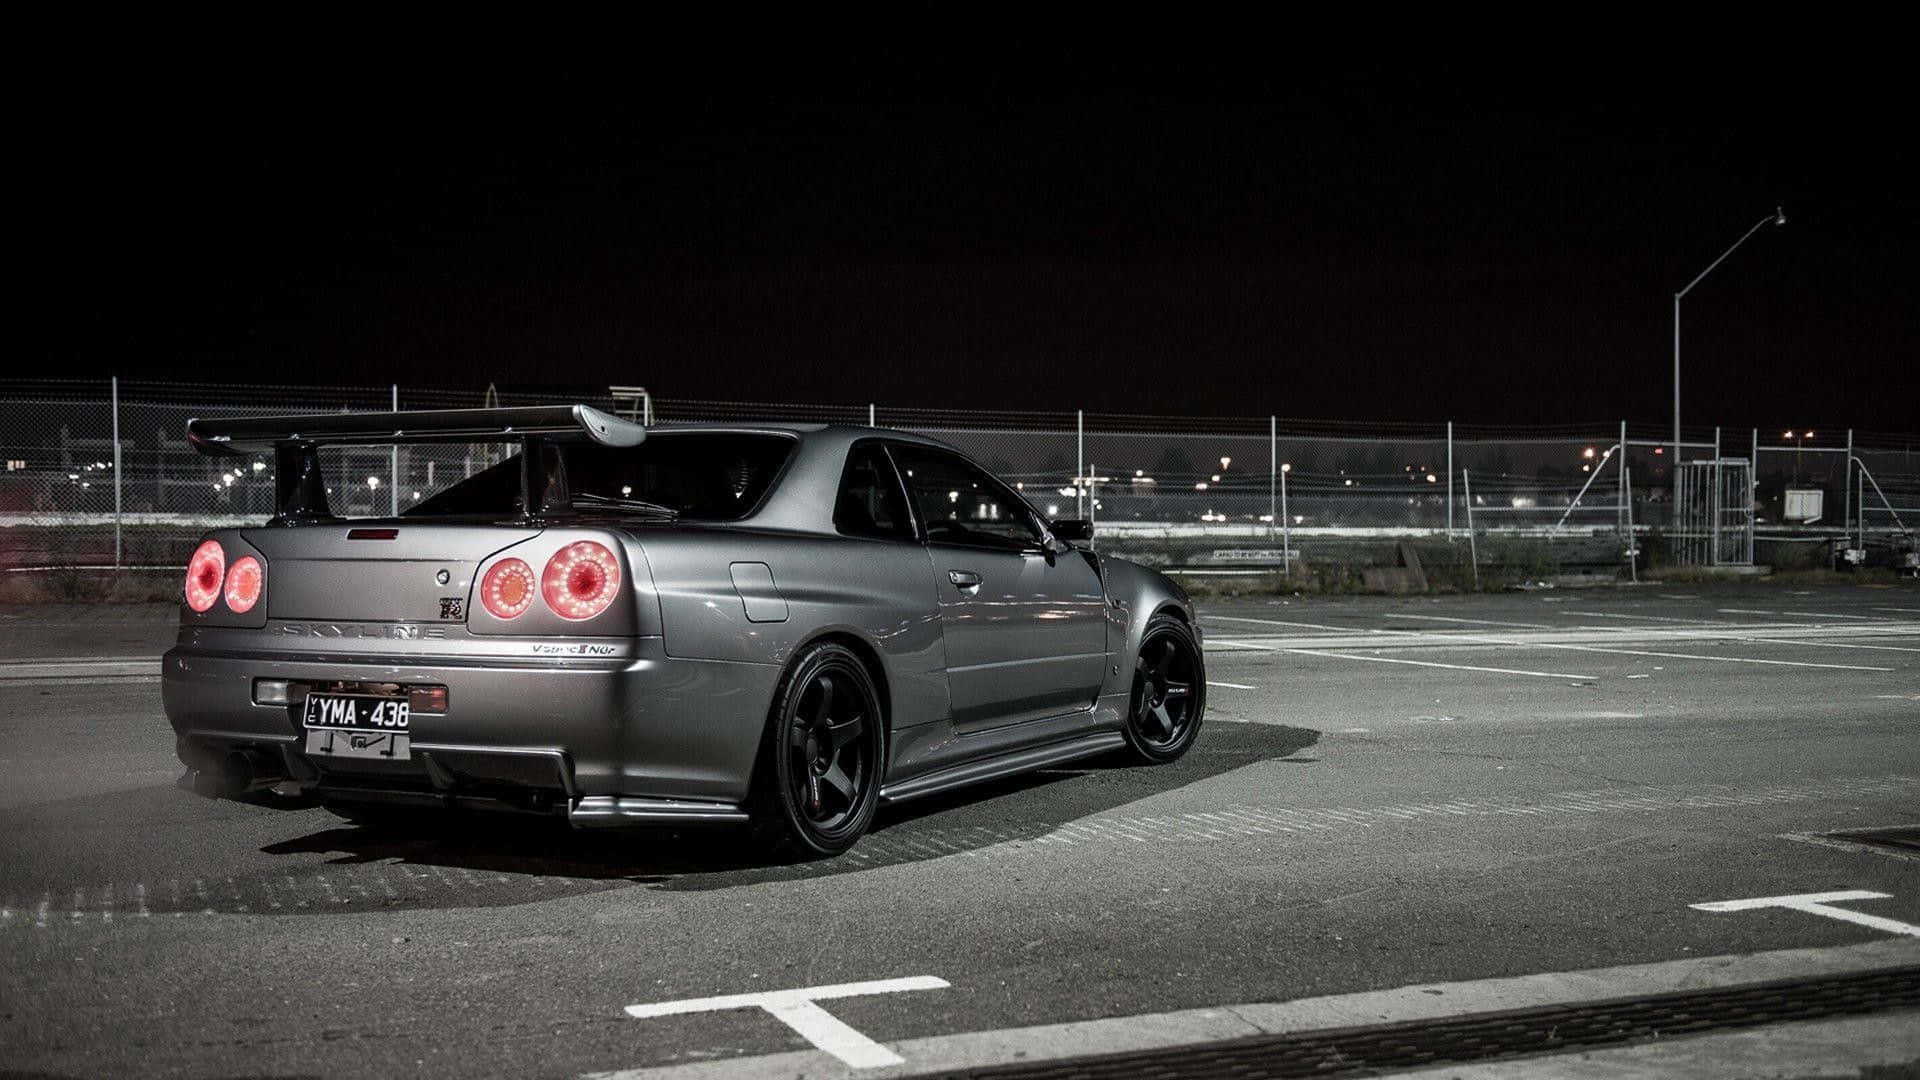 Get Behind The Wheel Of This Sleek And Stylish Cool Gtr Car. Background